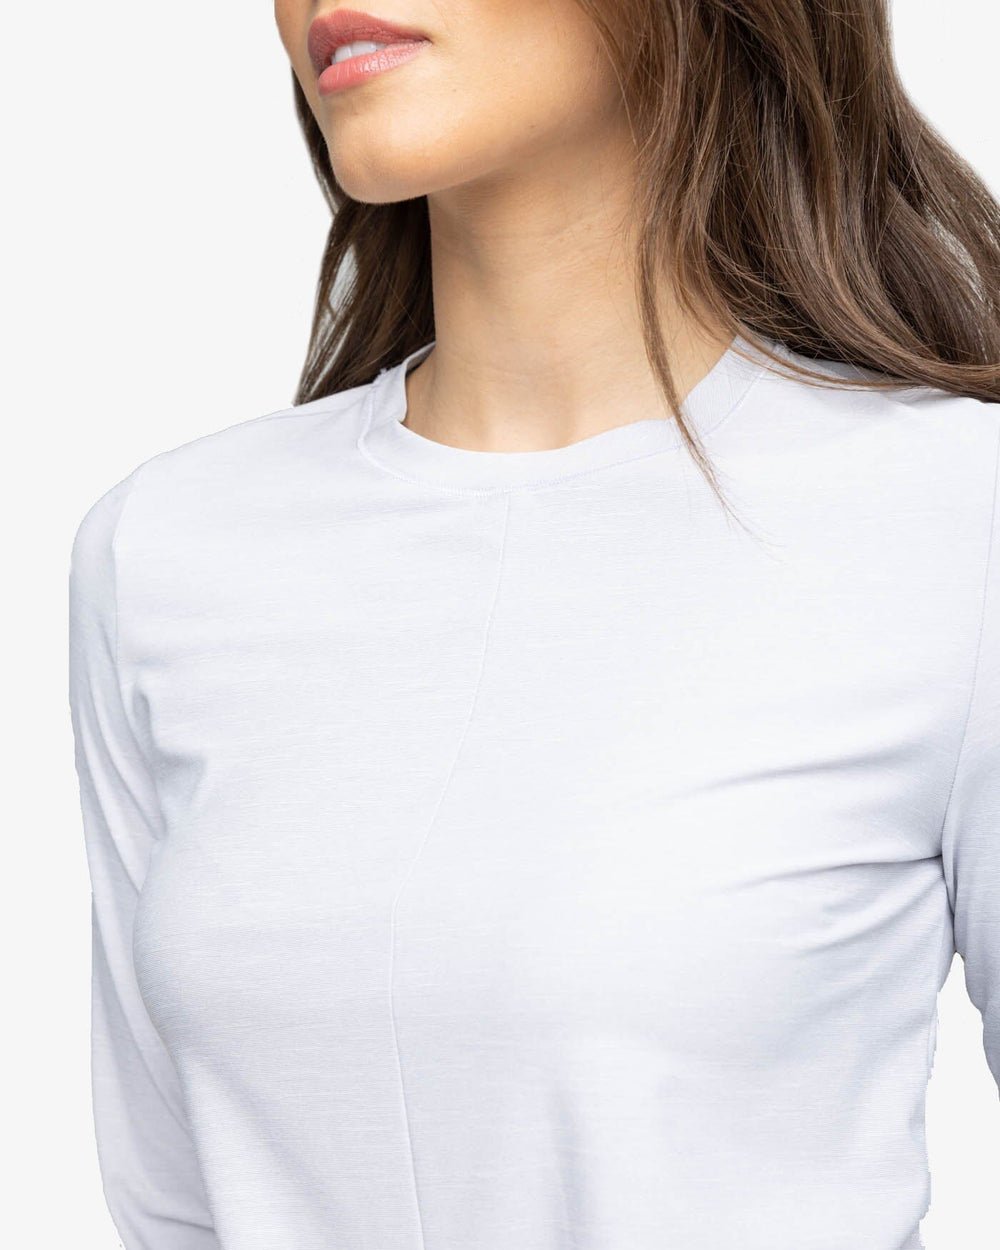 The detail view of the Southern Tide Margot brrr°-illiant Twist Knot Top by Southern Tide - Platinum Grey